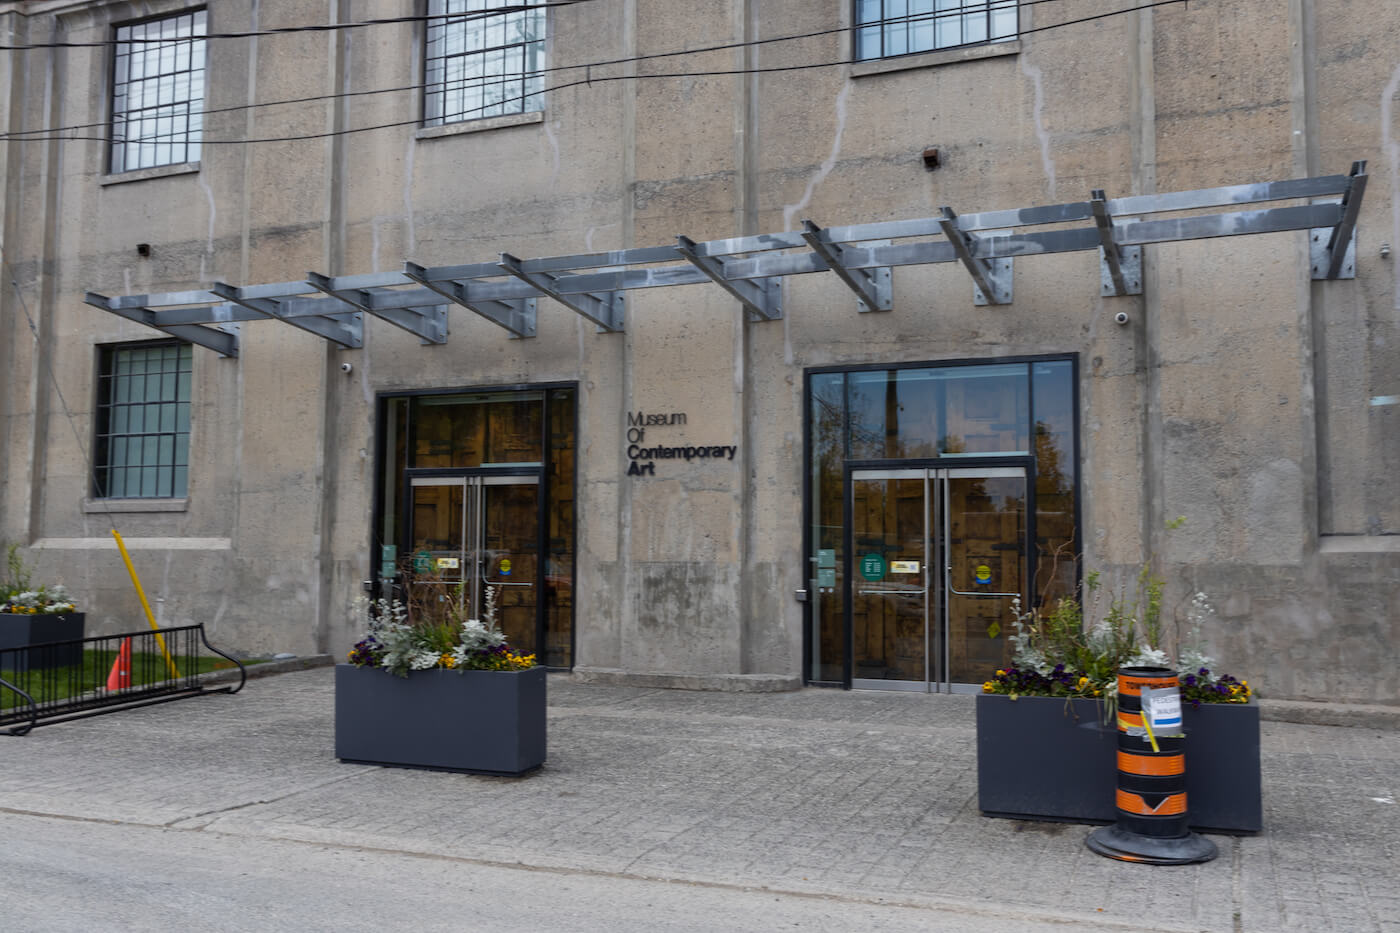 Things to do in roncesvalles – Museum of contemporary art